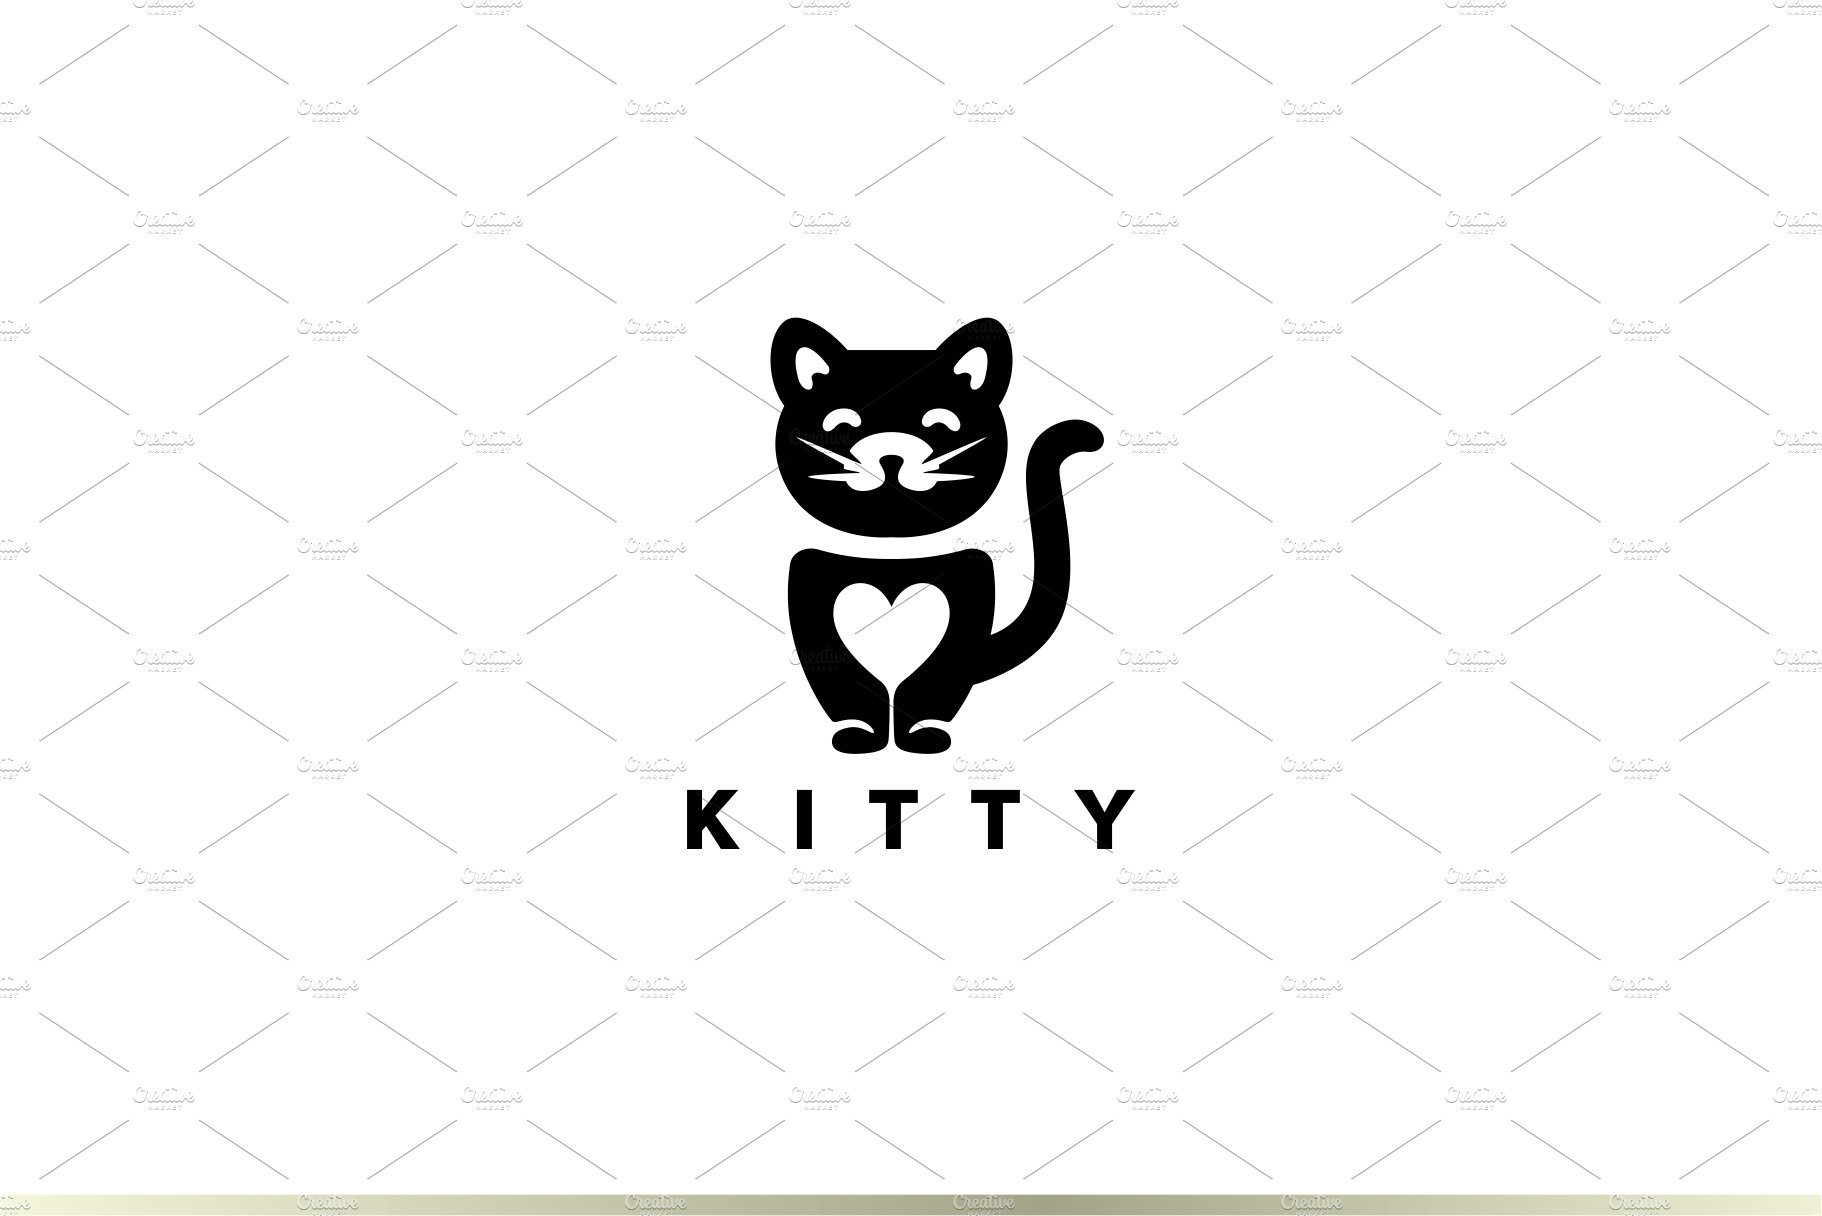 Kitty Logo cover image.